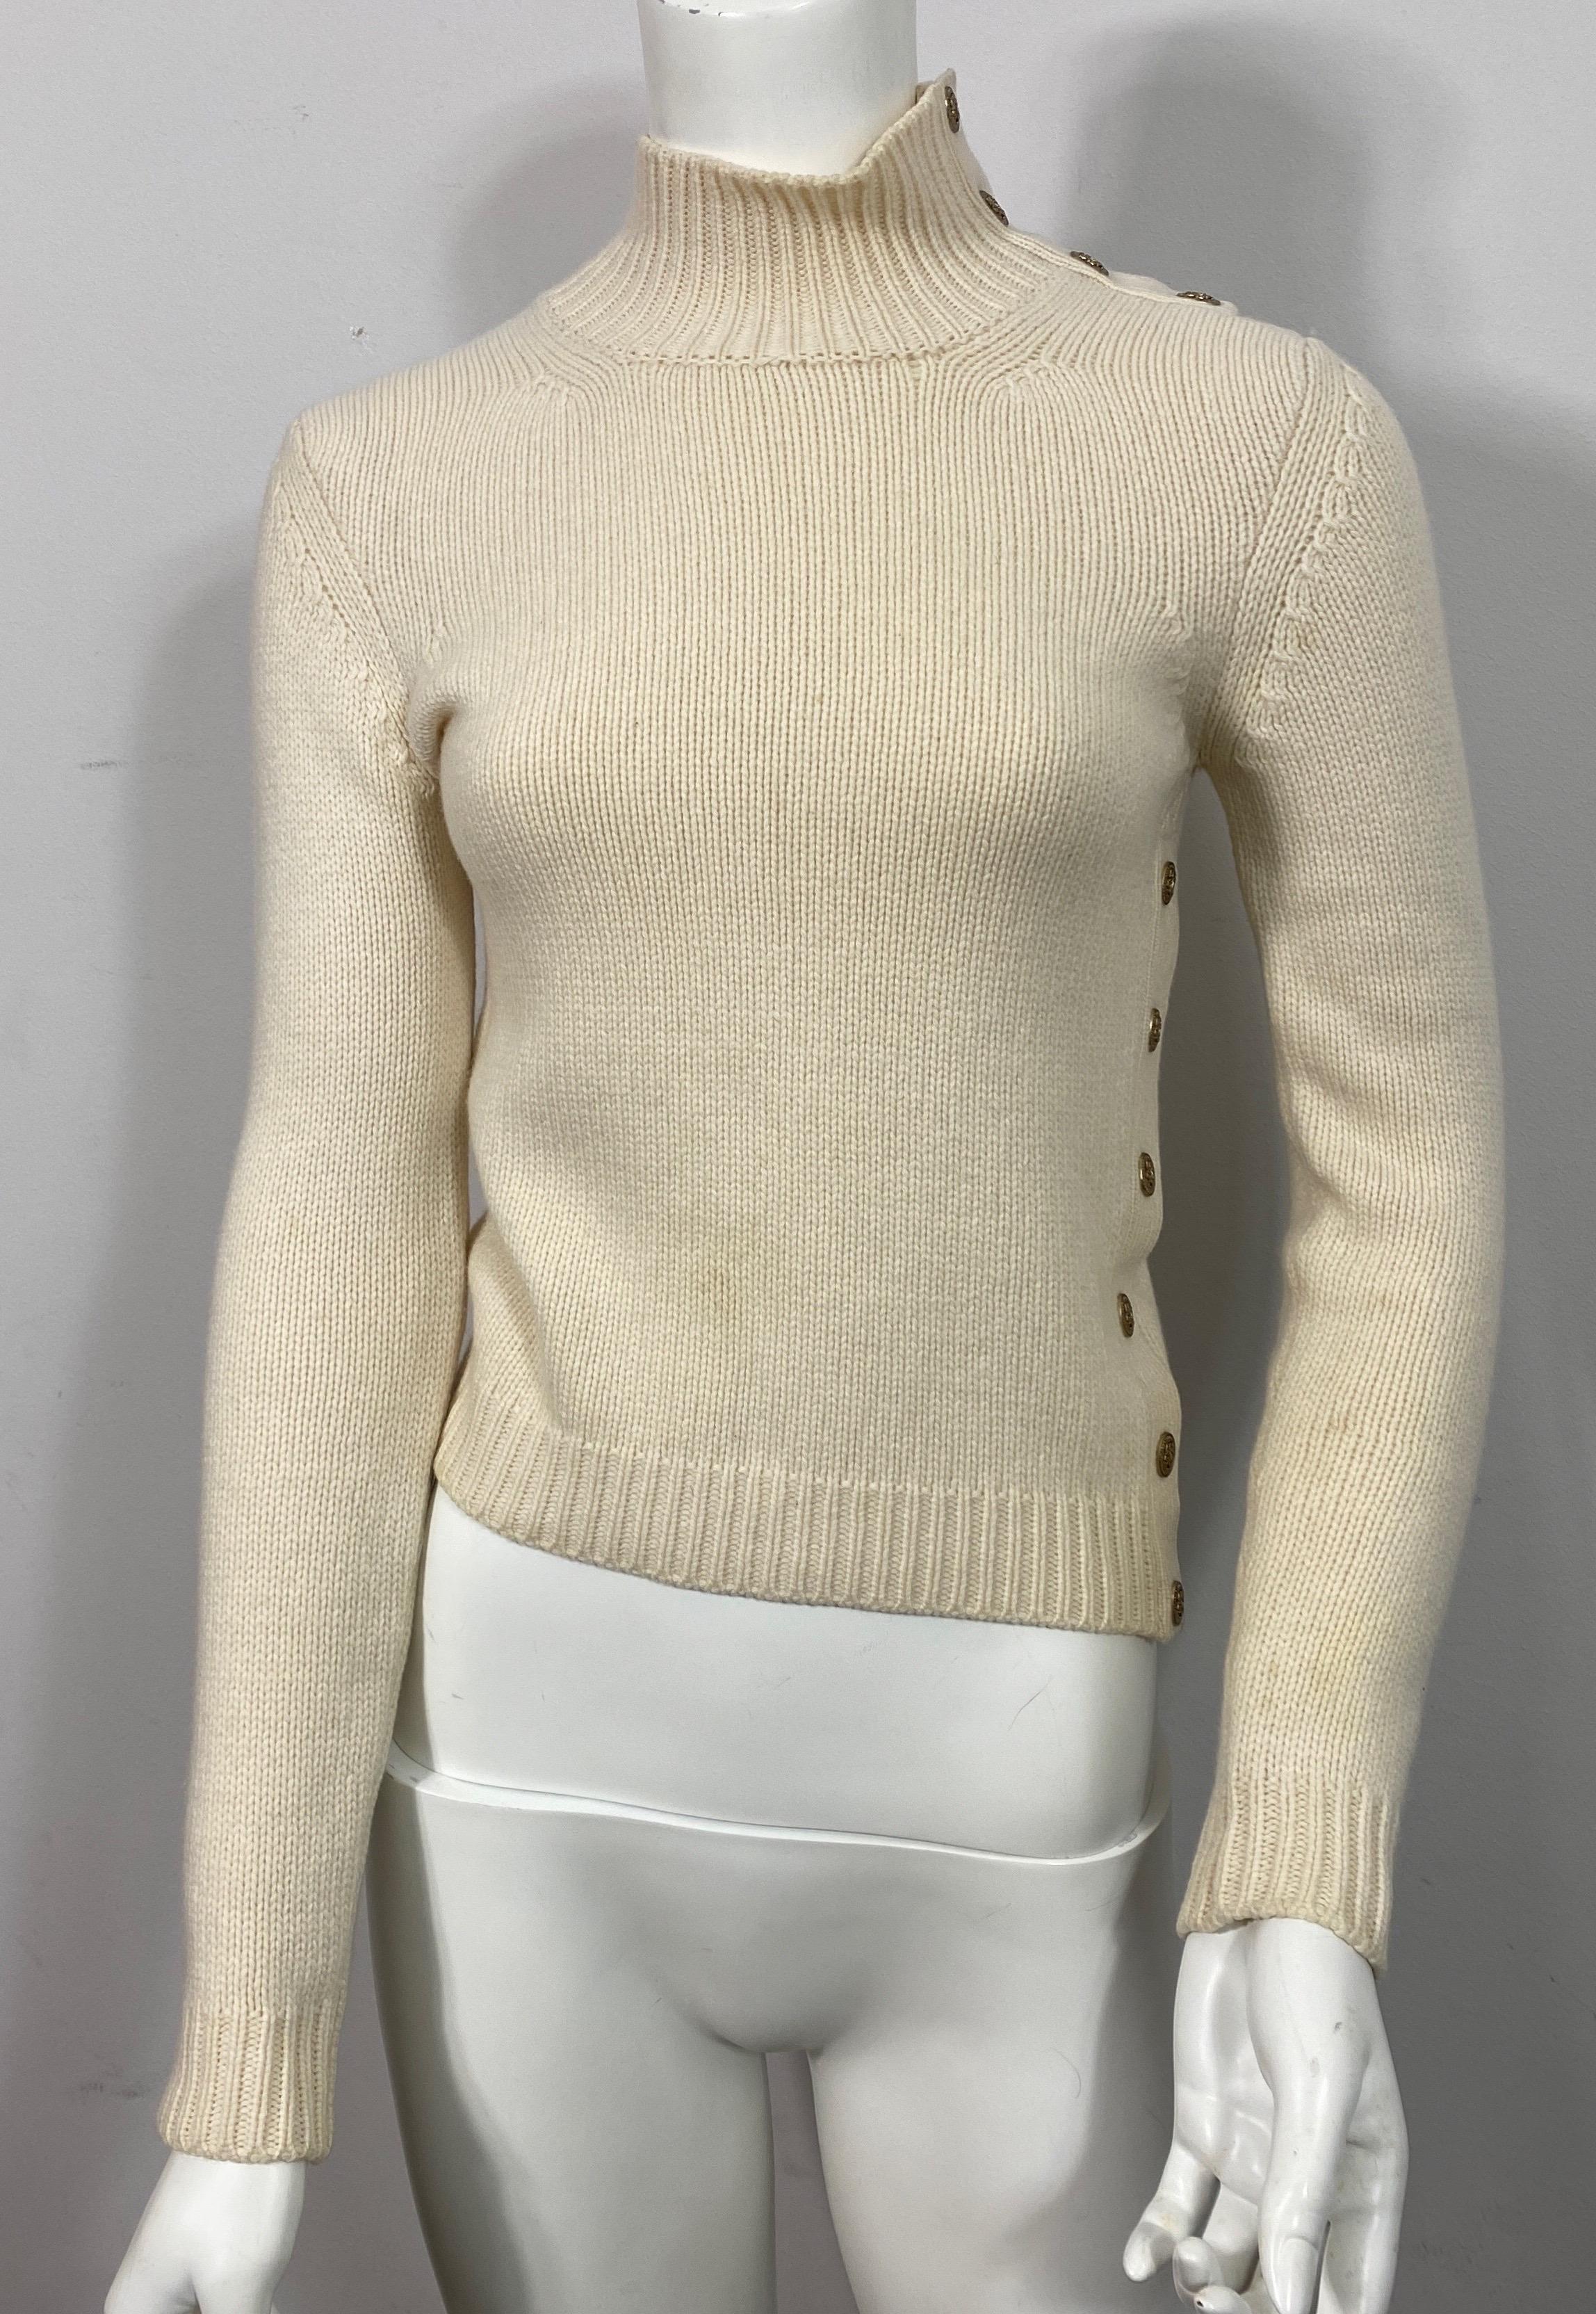 Chanel ivory cashmere knit sweater with logo snaps 2004A -Size 36

This classic early 2000’s chanel cashmere sweater is gorgeous. It is has a simple knit with a cable knit detail on the bottom, end of sleeve and the semi turtle neck. The neck has 4